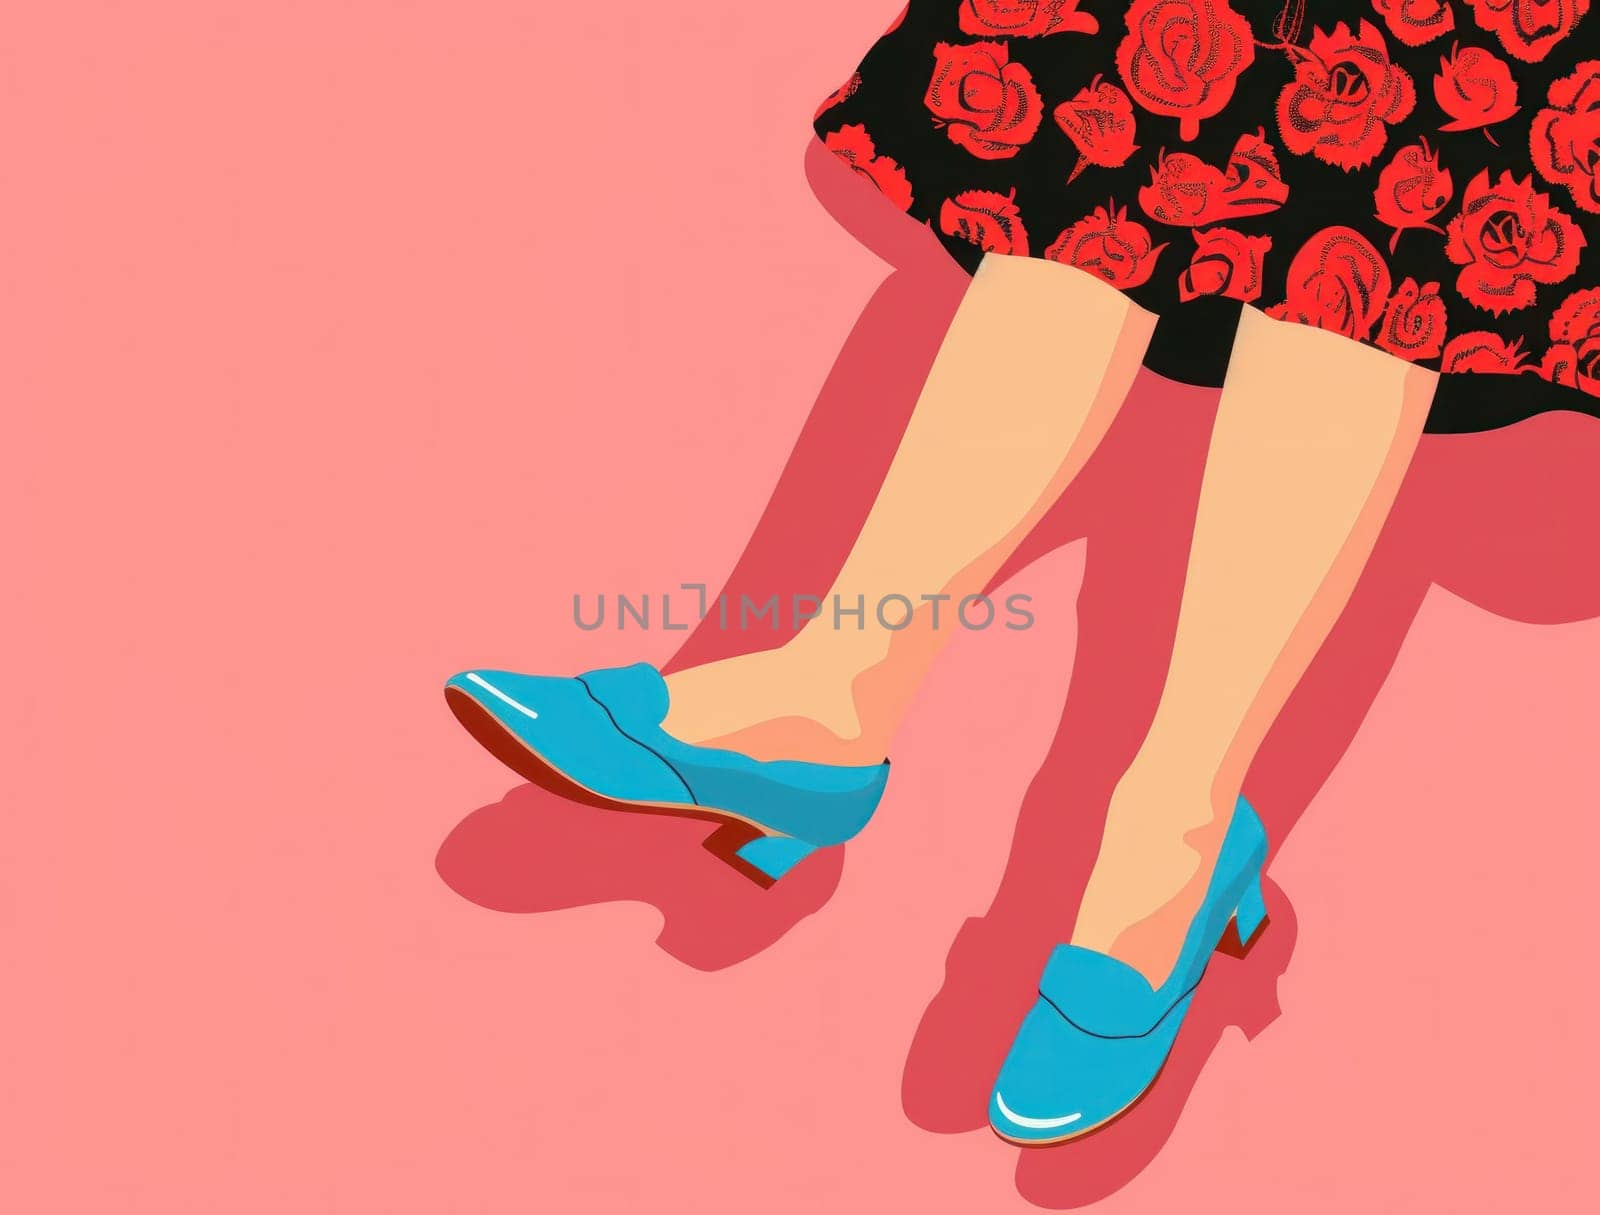 Woman's floral dress and blue shoes on pink background, beauty and fashion concept with legs of female model